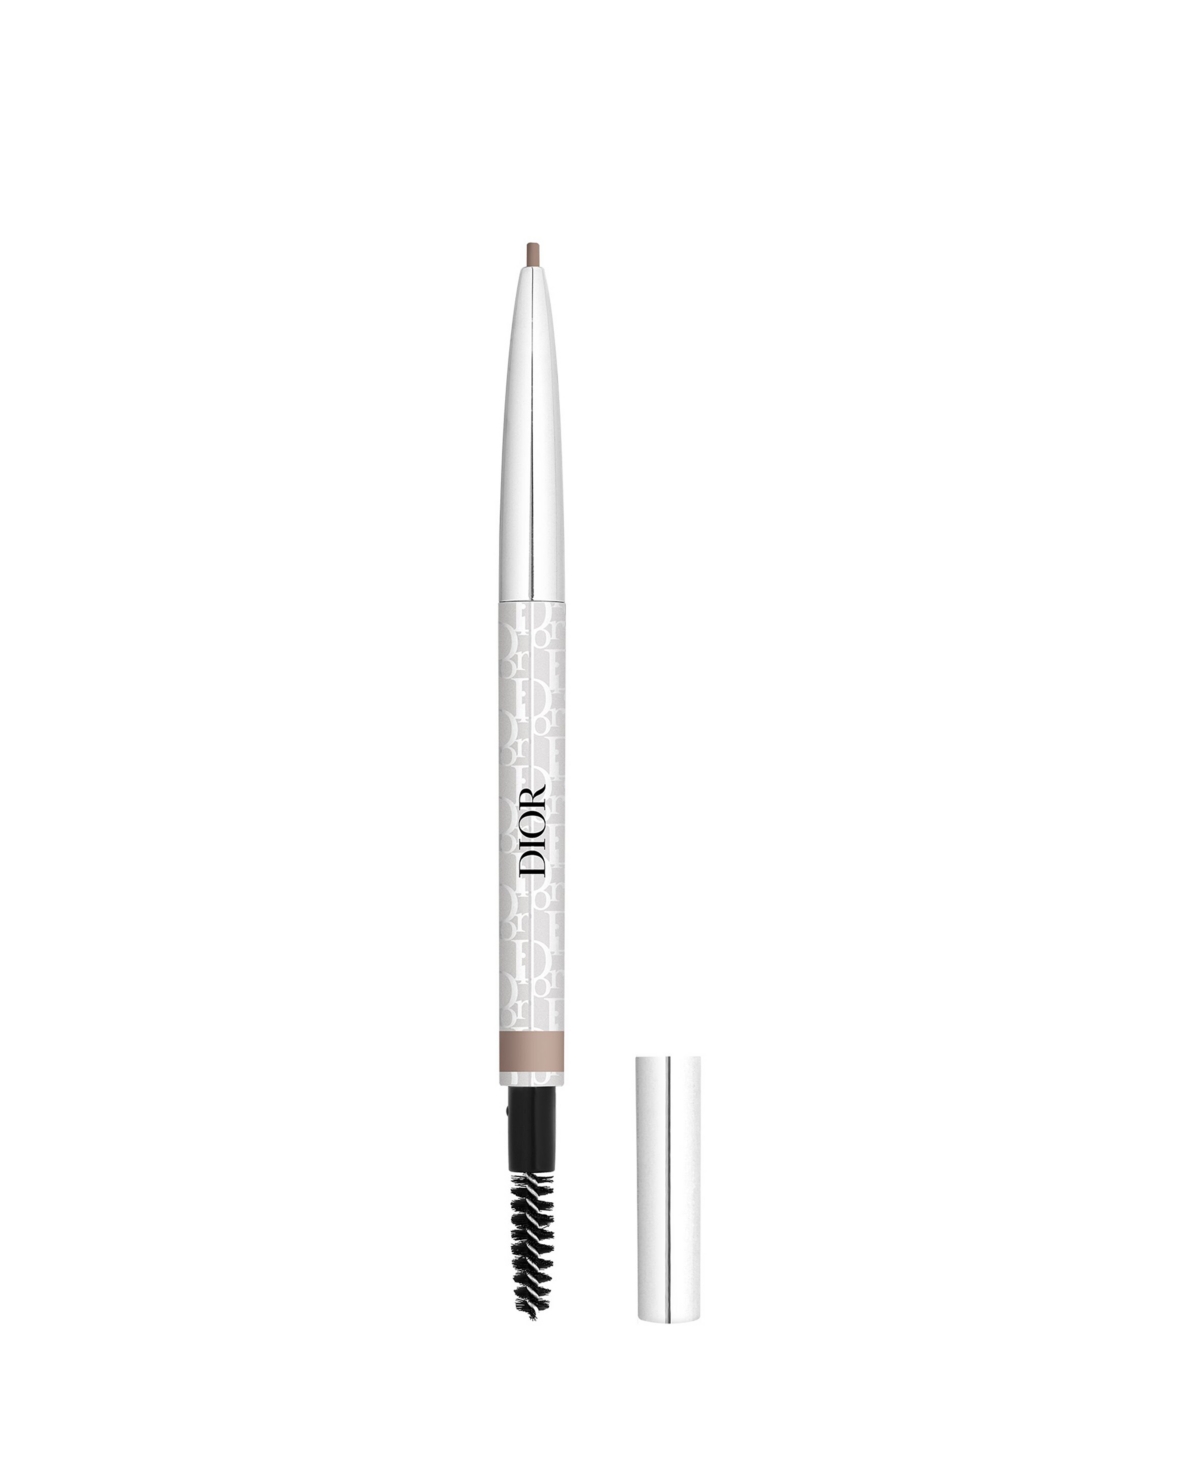 Dior Show Brow Styler Eyebrow Pencil In Blond